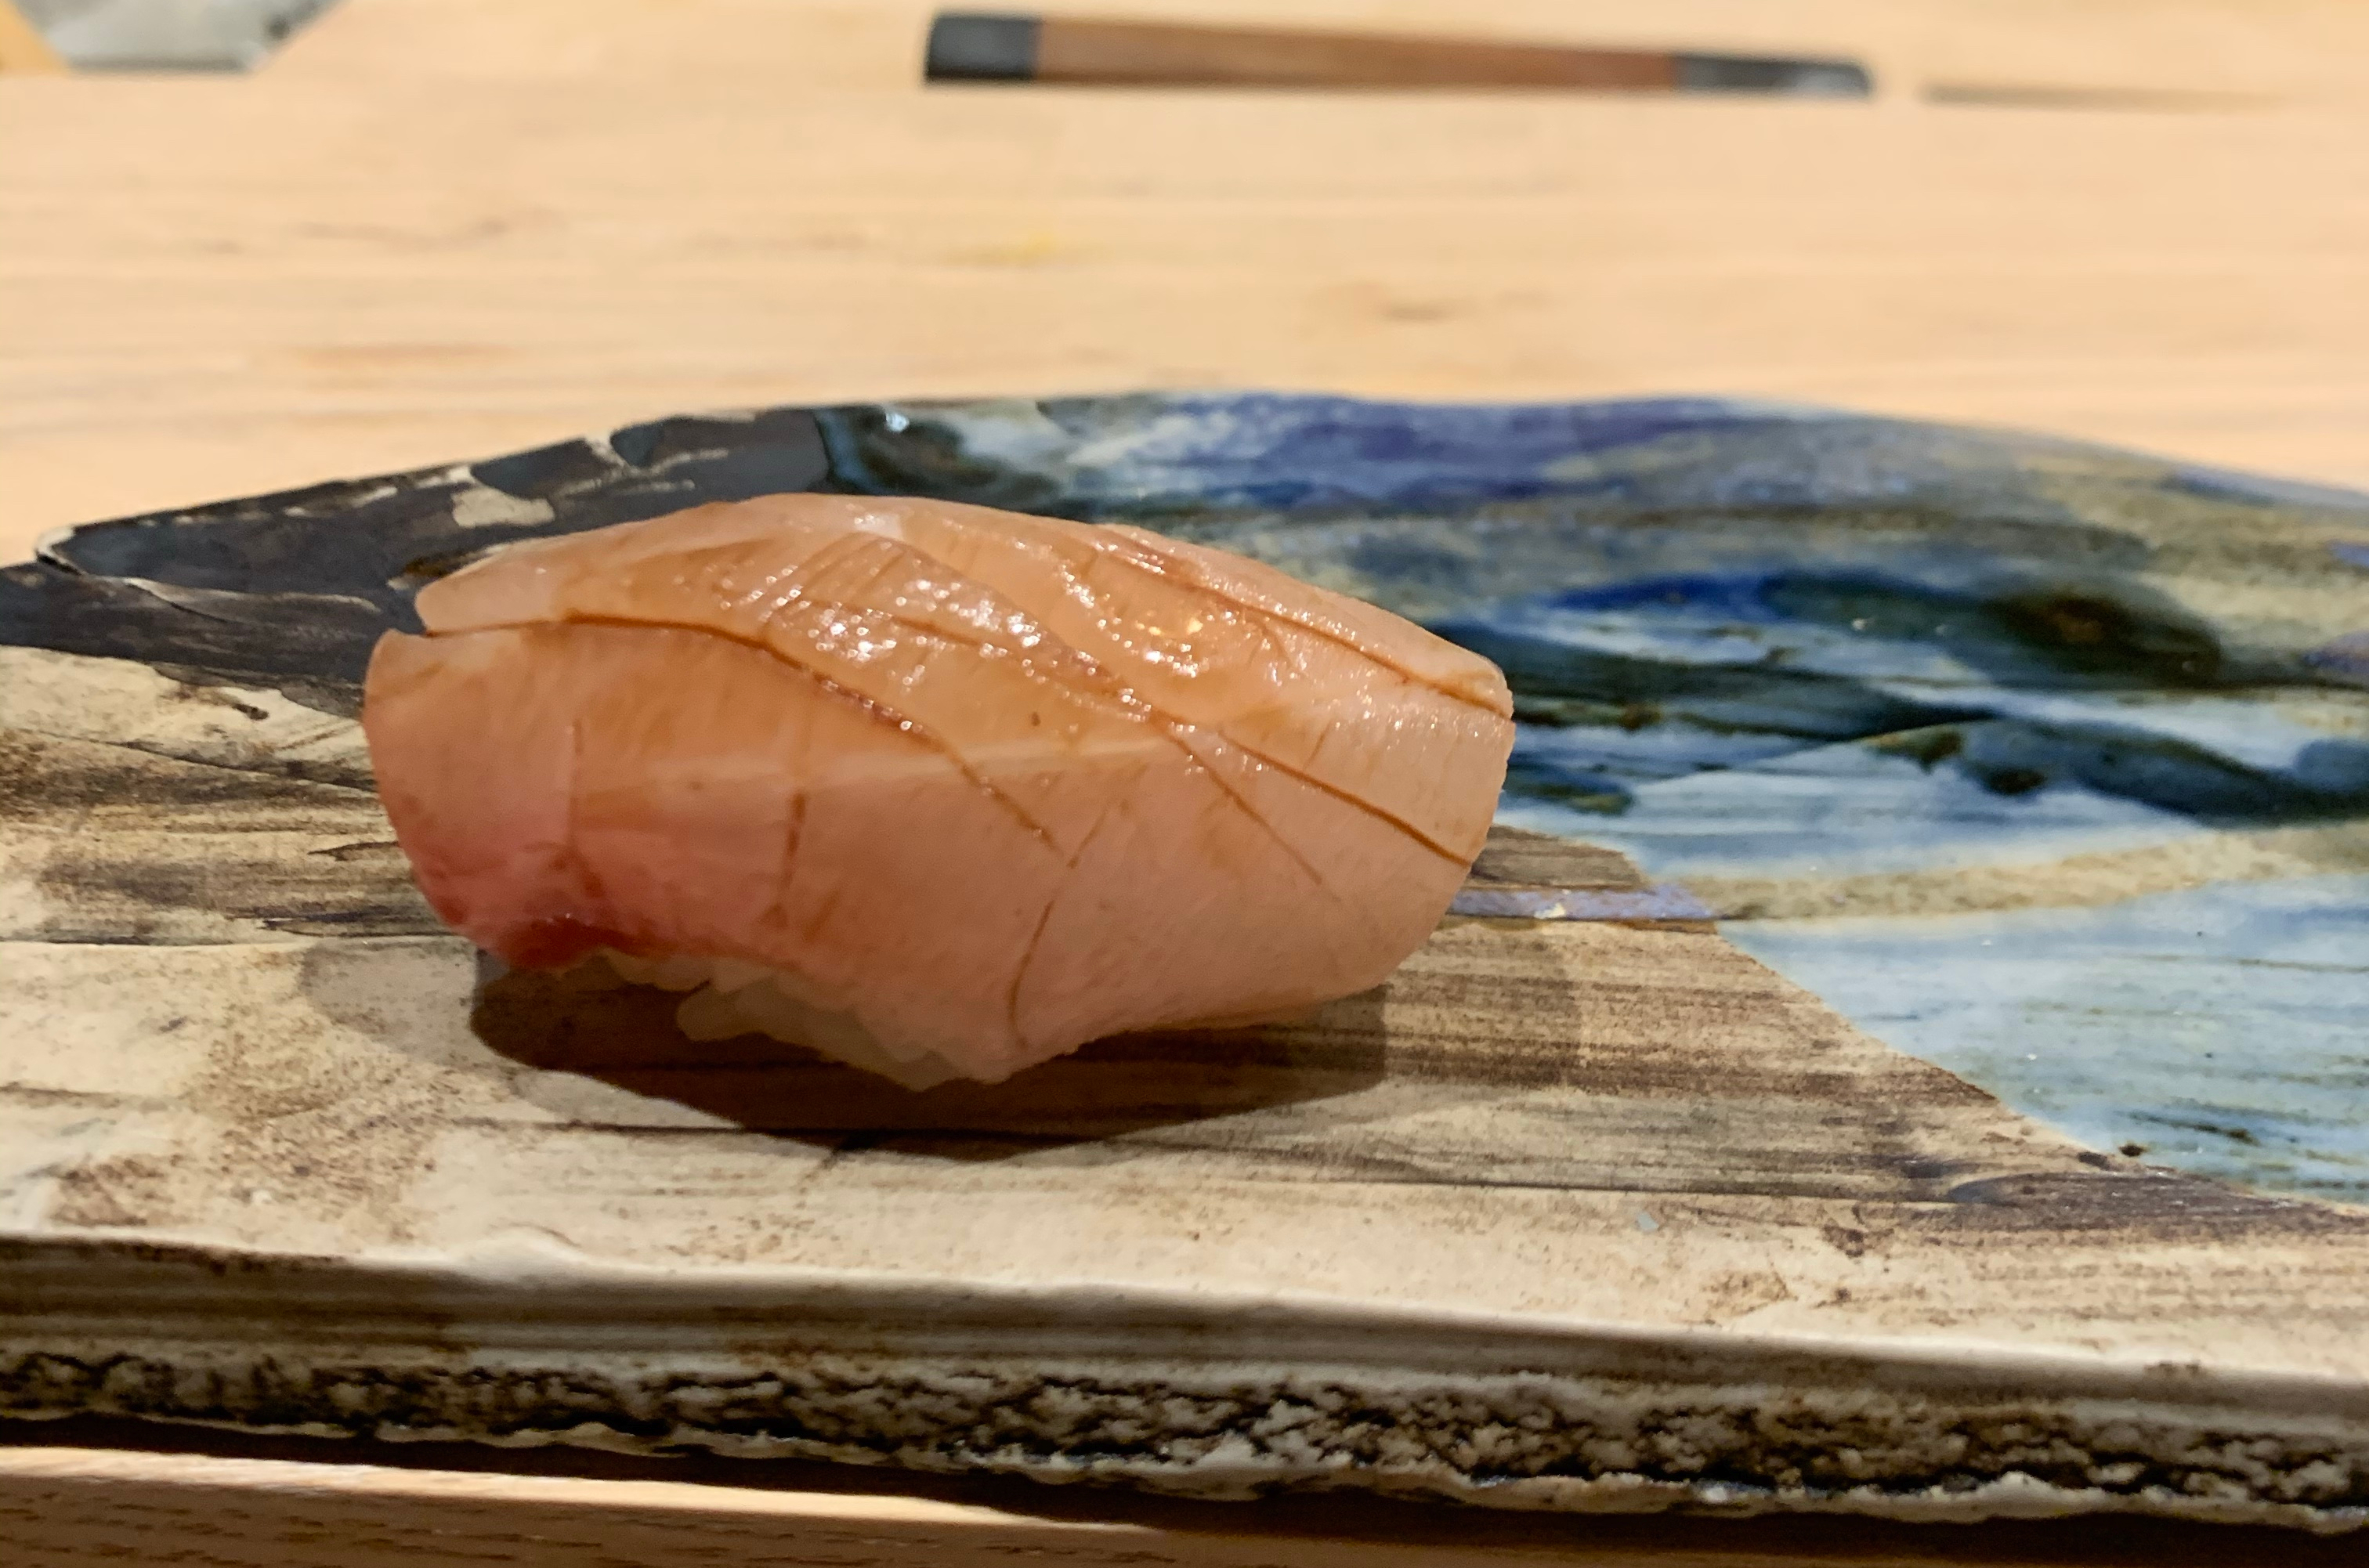 One piece of nigiri sushi with a white fish. The fish has been brushed lightly with soy sauce, which has pooled in the gaps between the muscles, giving it a look like it's been drawn on